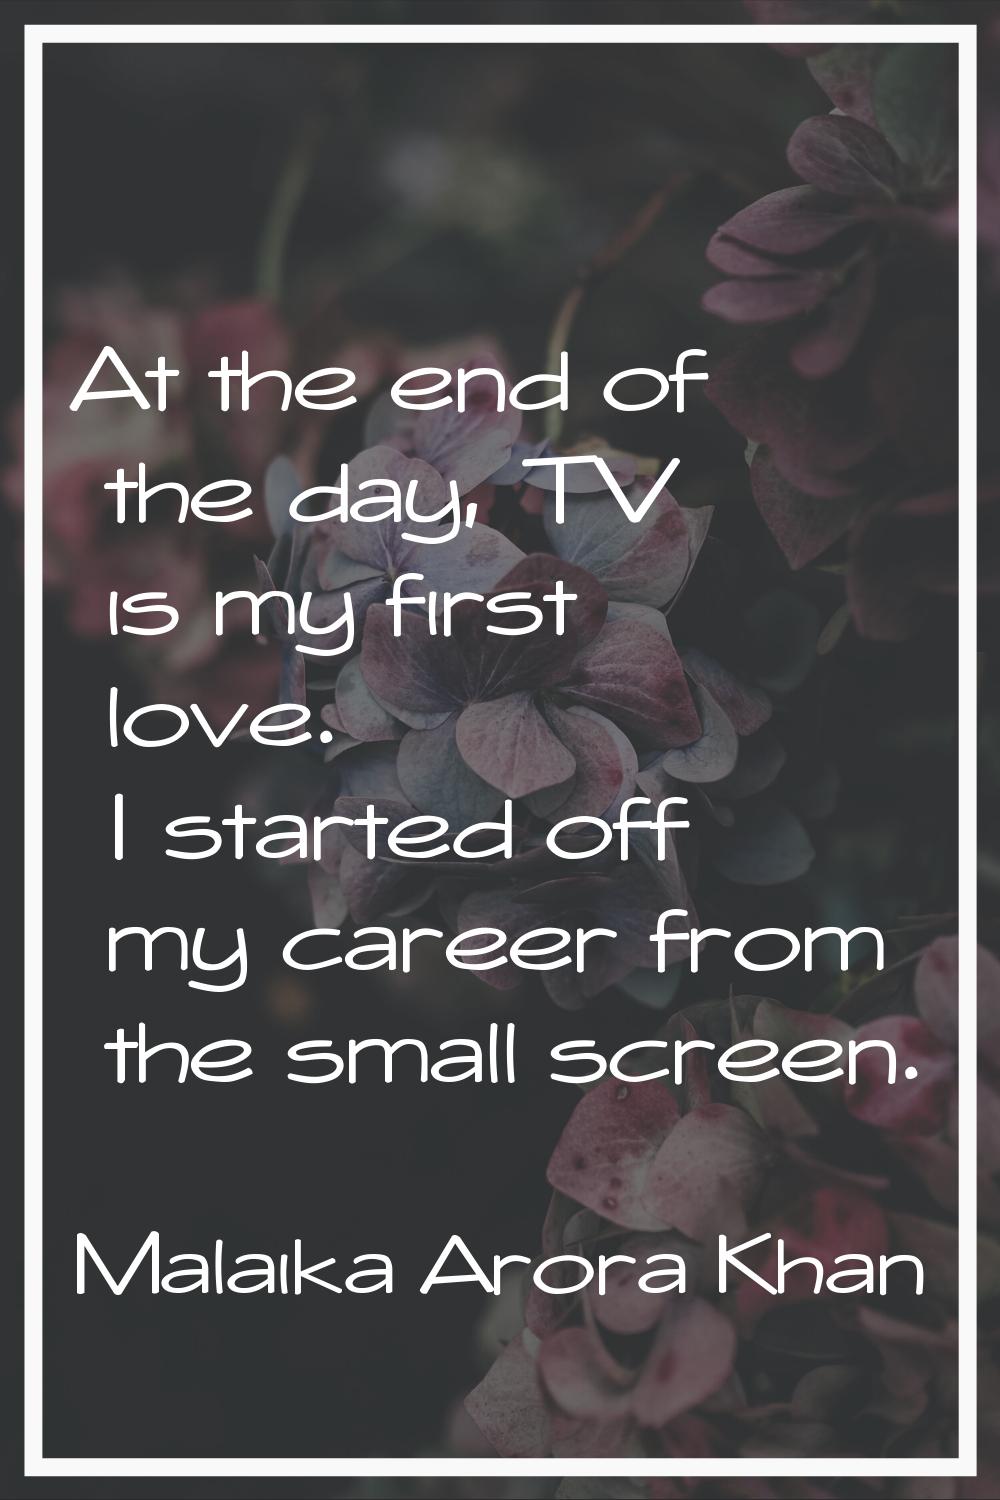 At the end of the day, TV is my first love. I started off my career from the small screen.